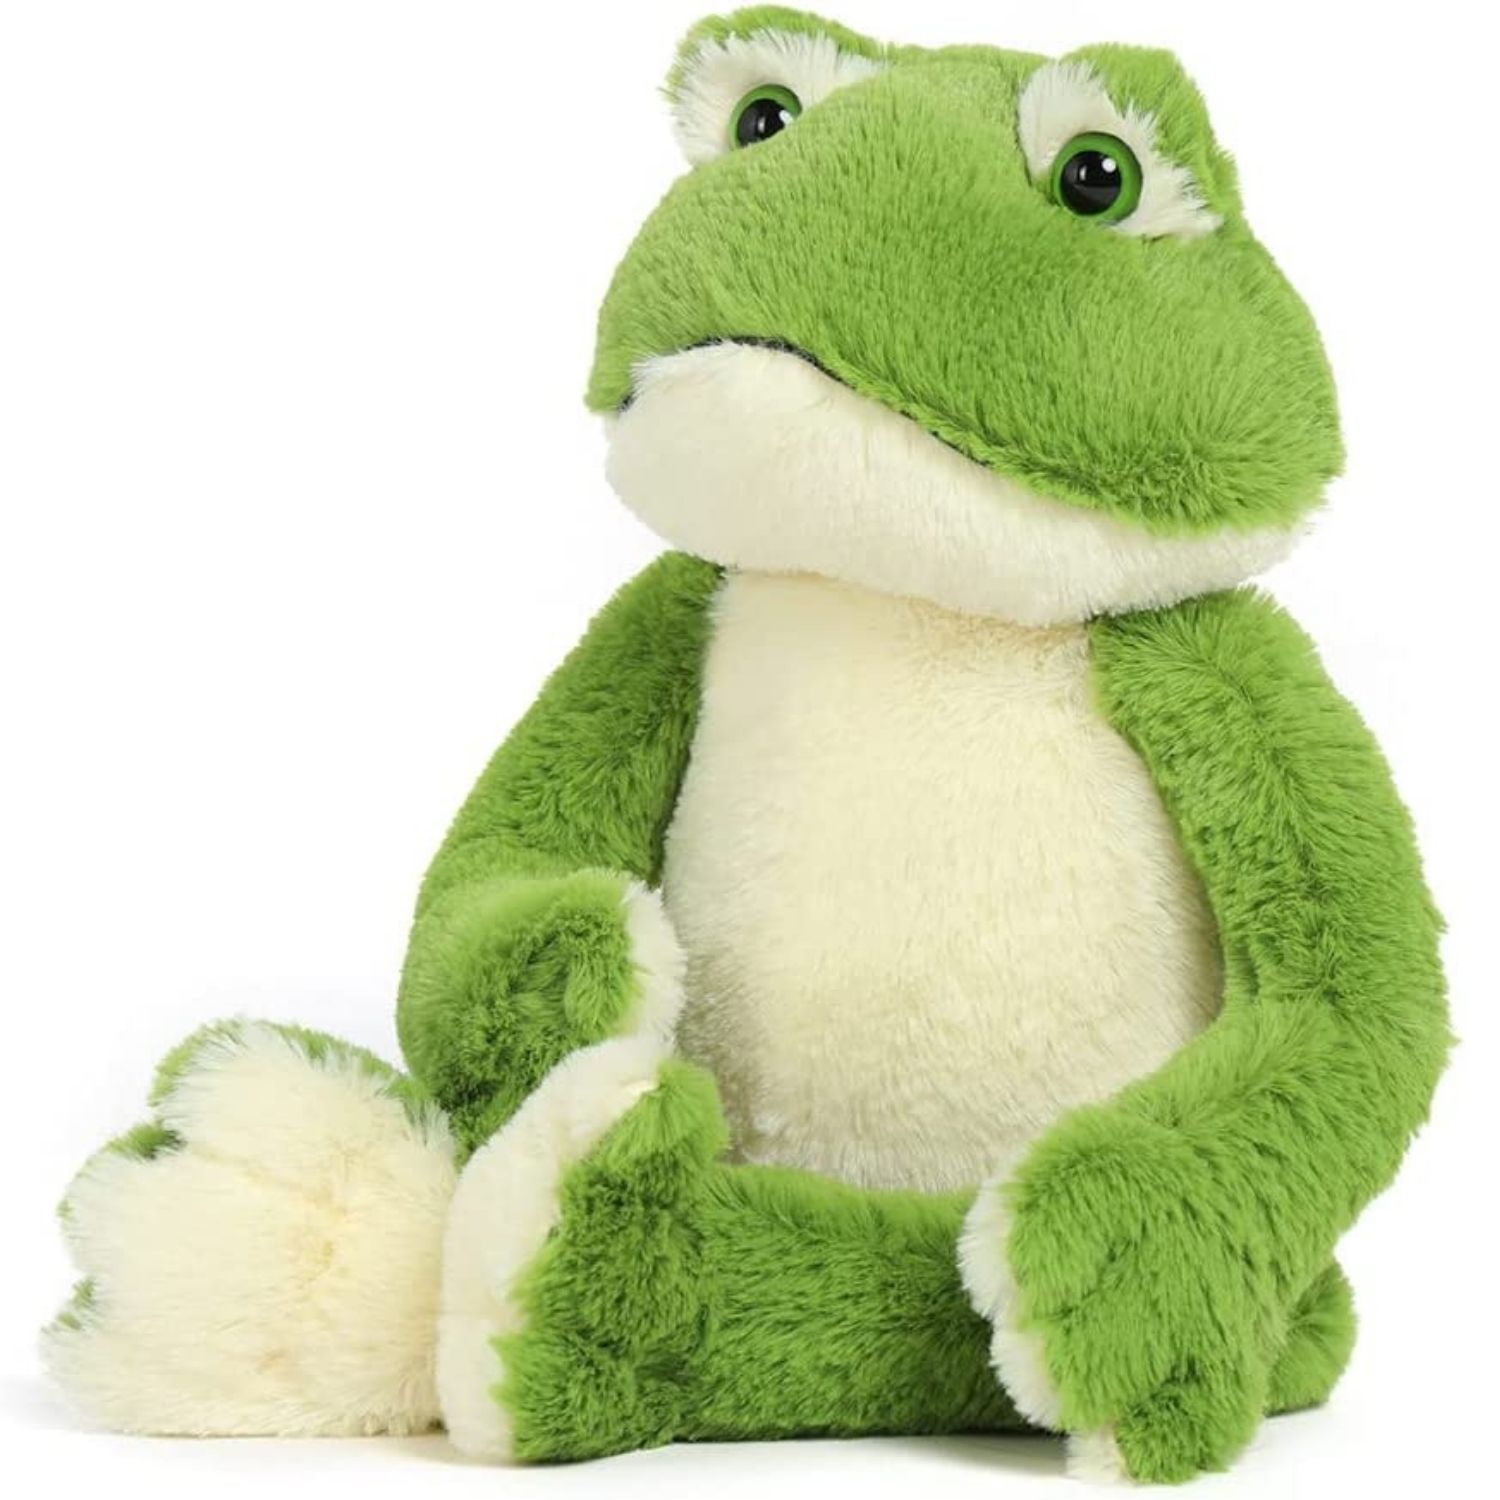 MaoGoLan Plush Frog Stuffed Animal 17.7 Cute Frog Soft Toy with